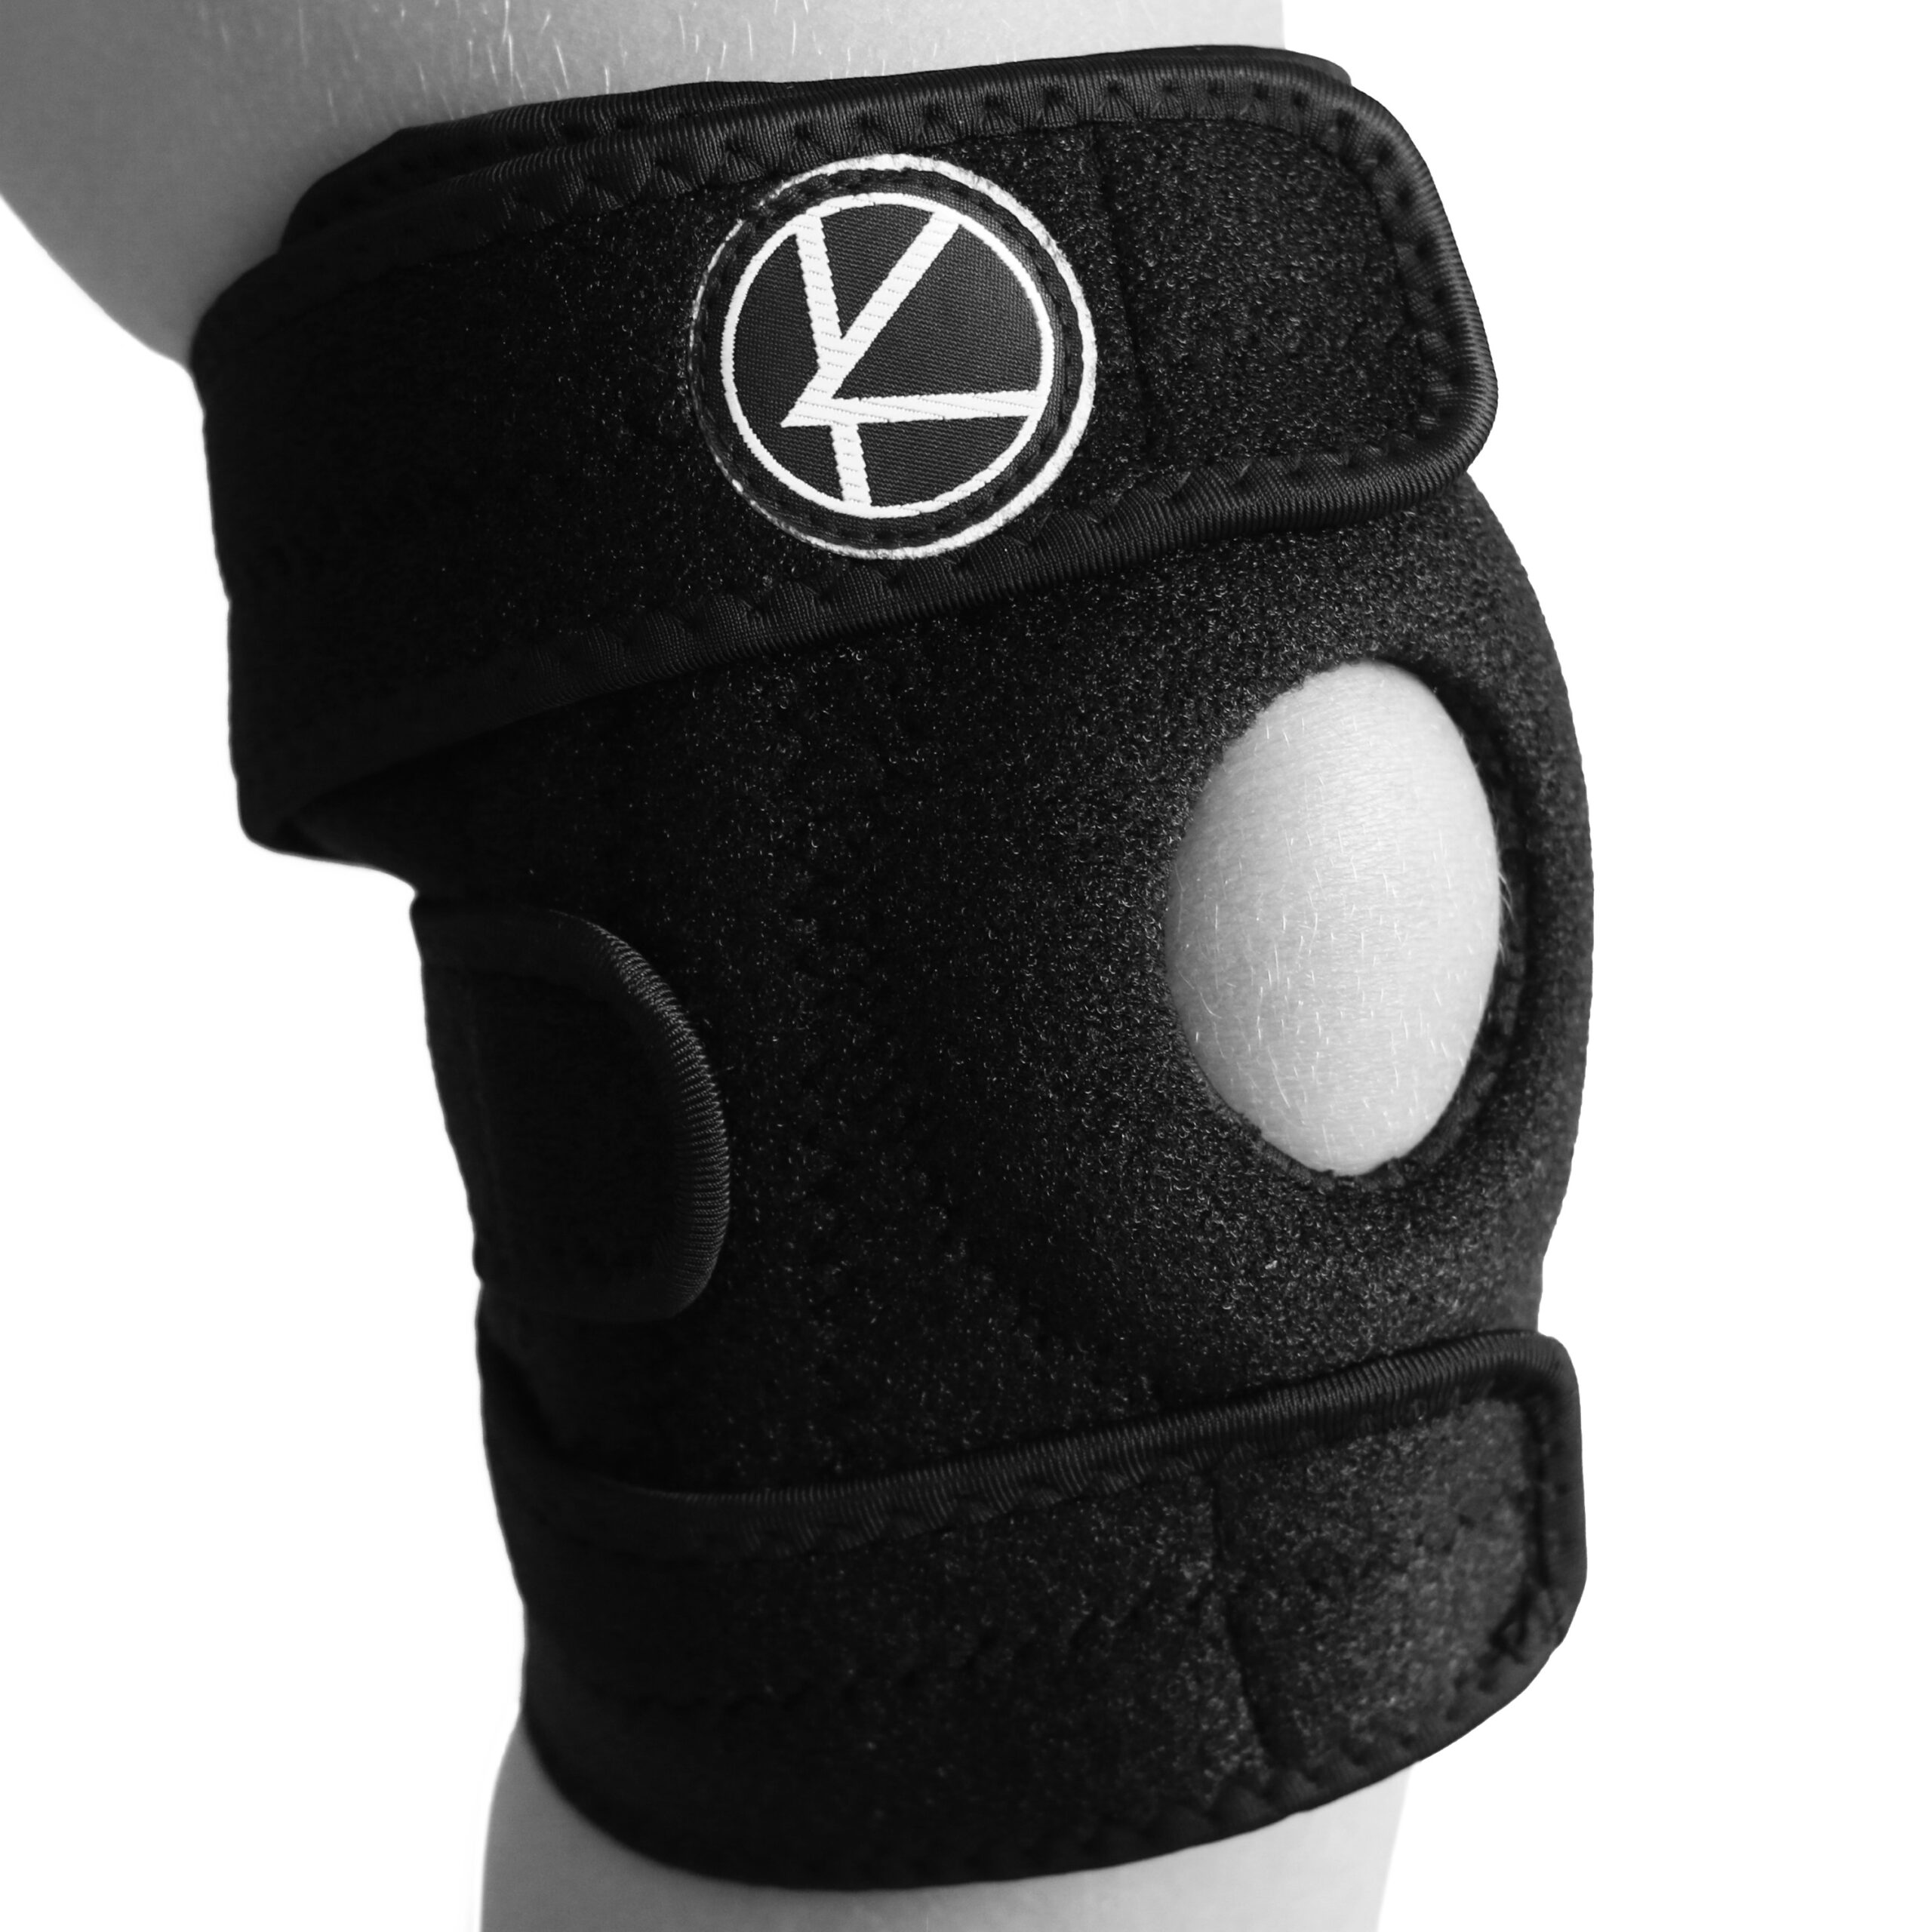 Kids knee brace offers essential functionality by providing targeted support and stability for young individuals.